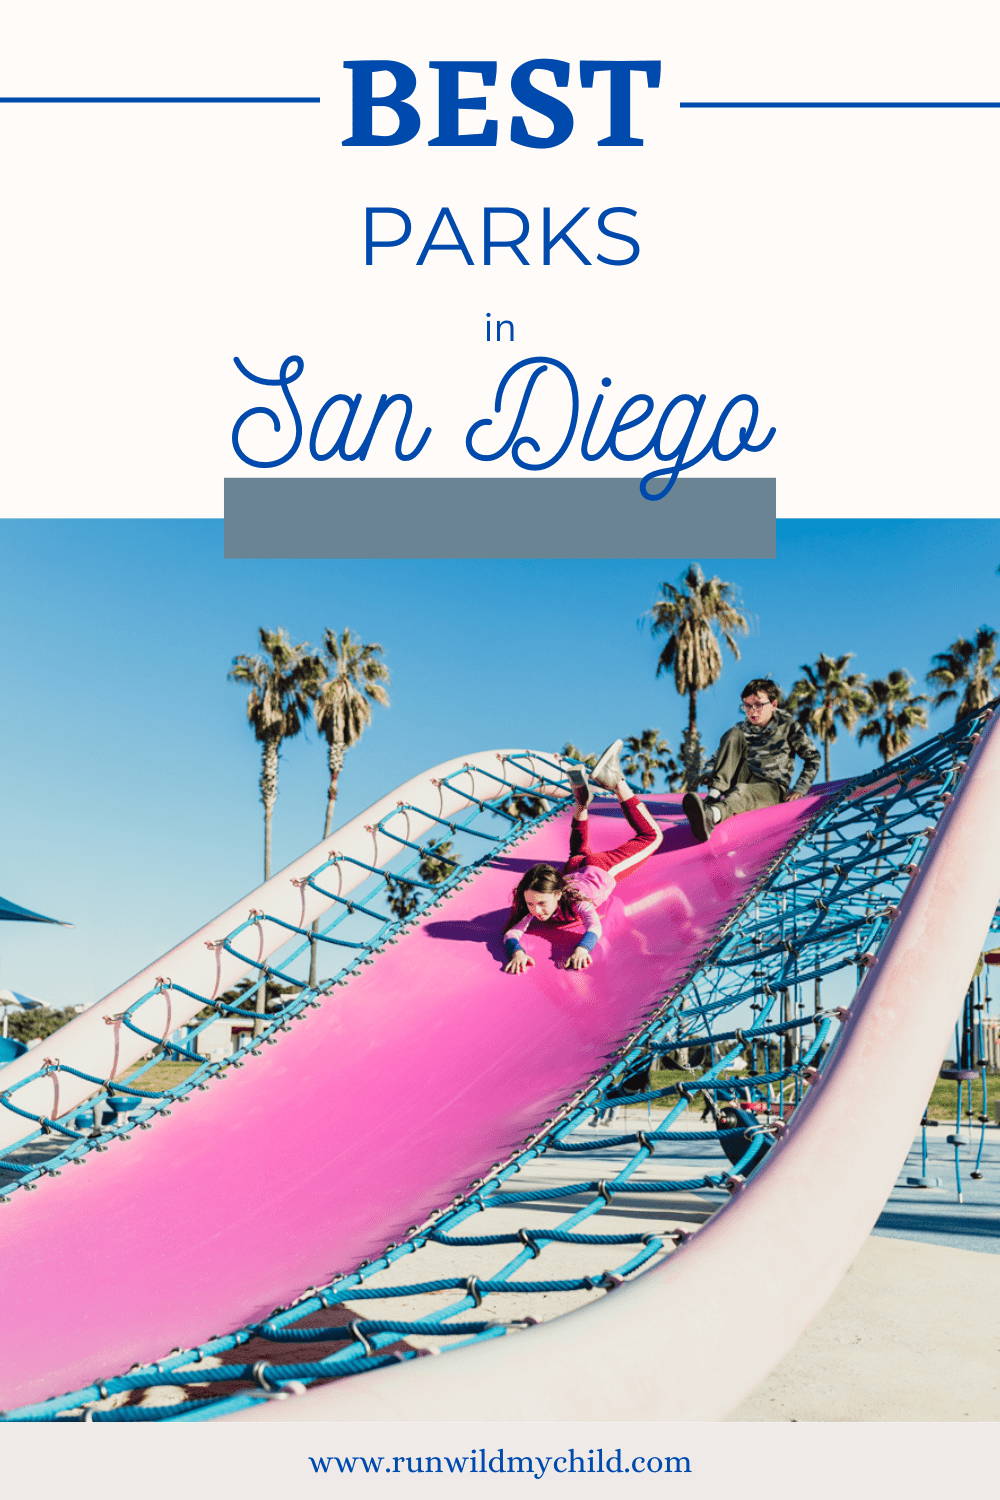 Best parks in San Diego California - best city and county parks for kids and families